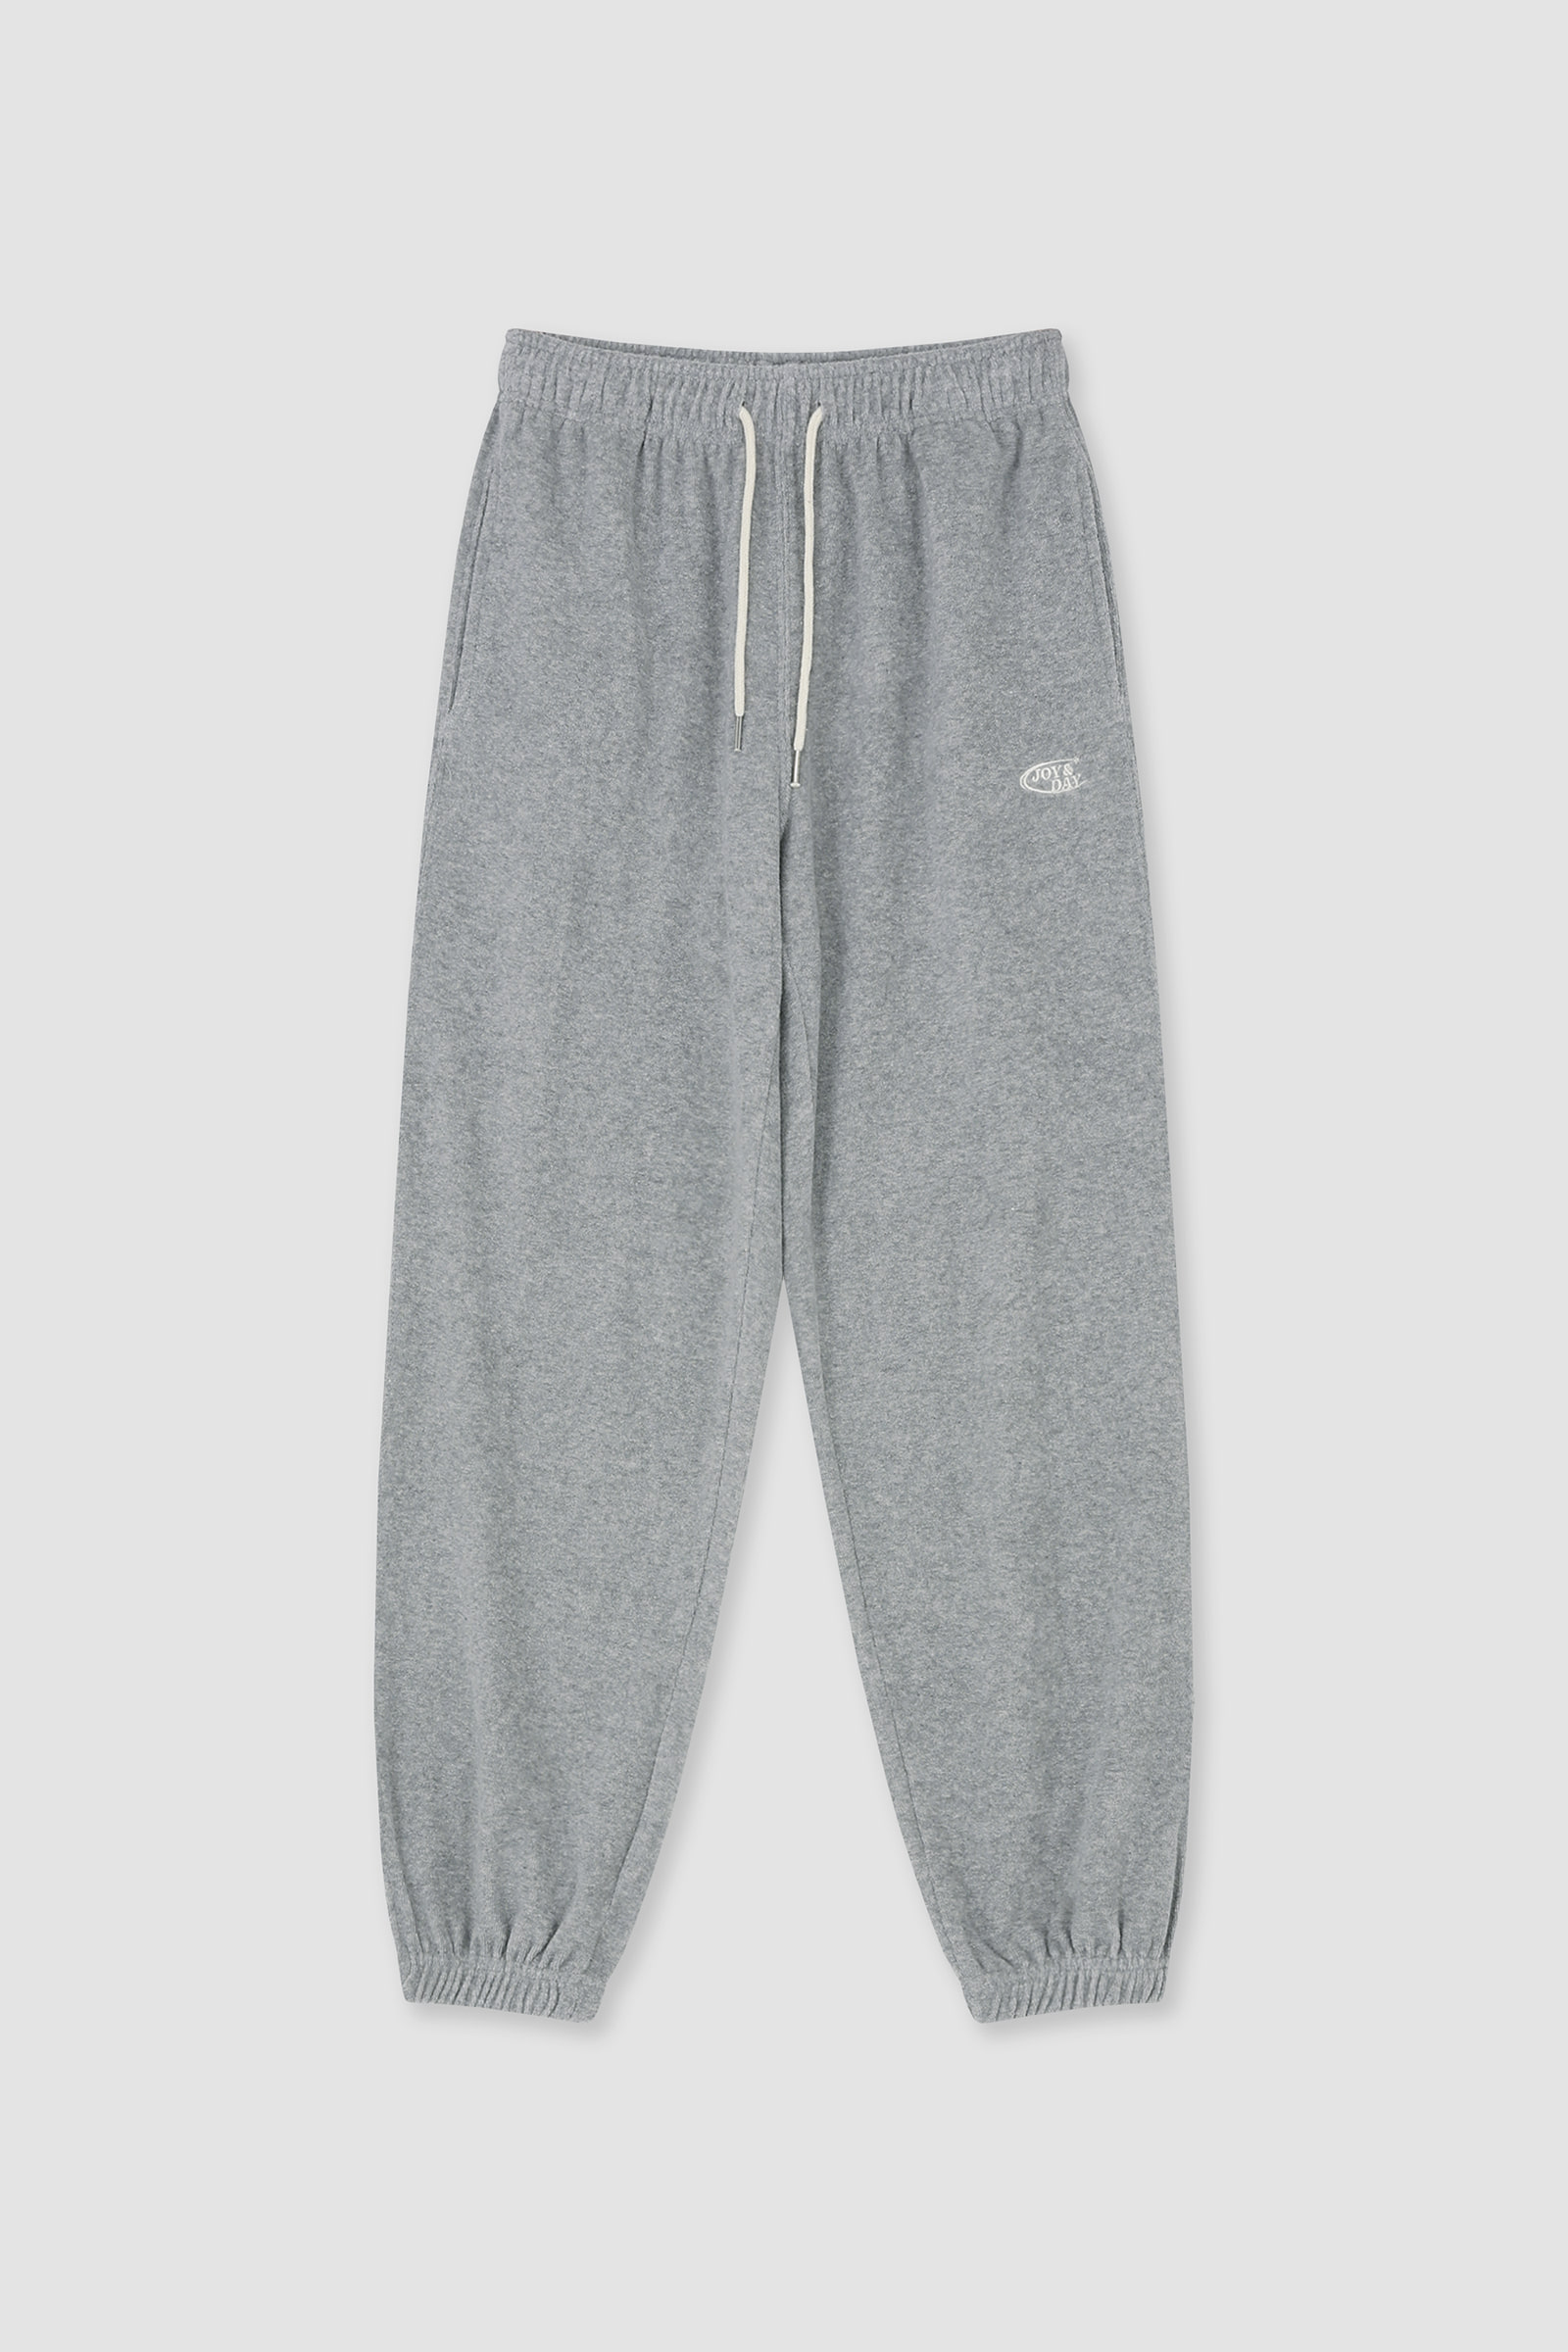 [17th] Terry Jogger Pants